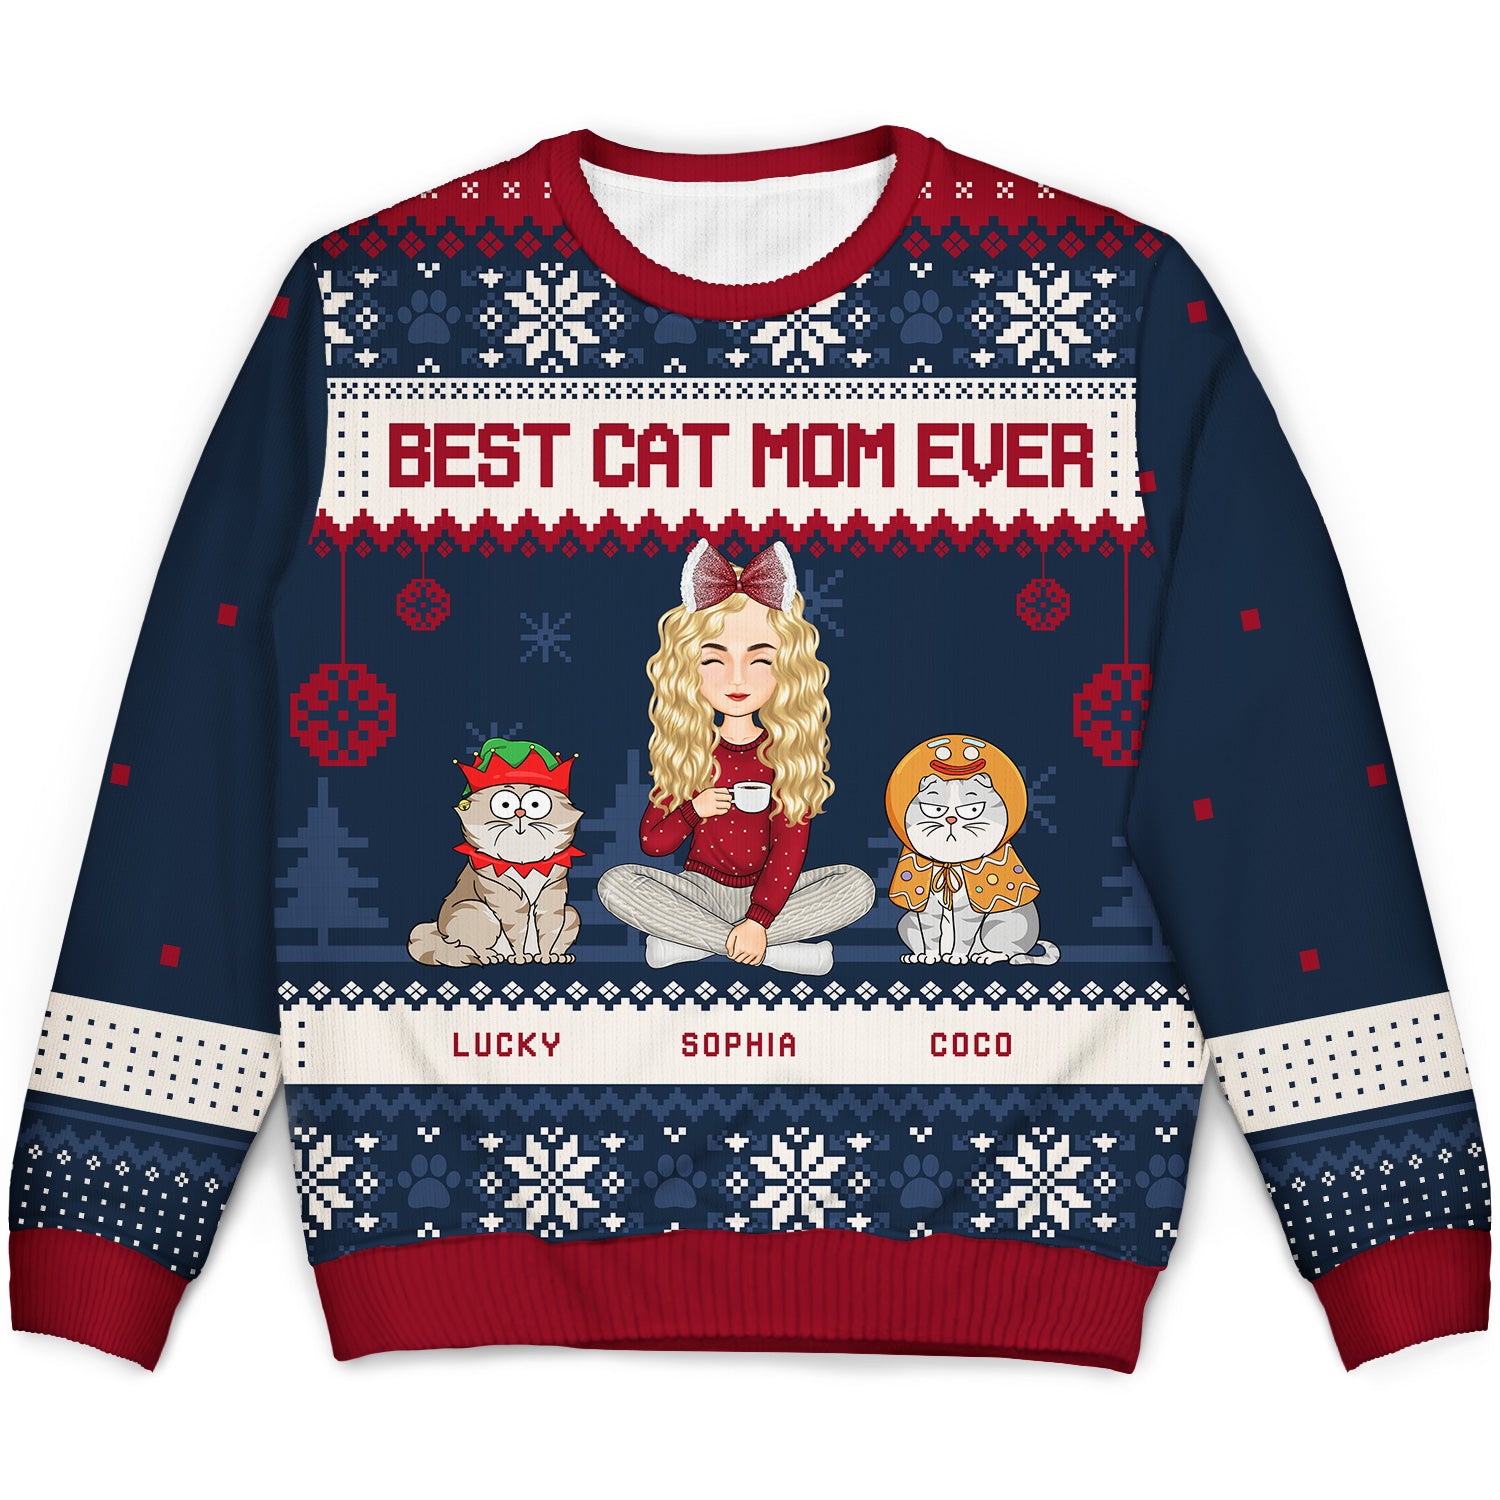 Best Cat Mom Ever Cartoon Style - Christmas Gift For Cat Lovers - Personalized Unisex Ugly Sweater